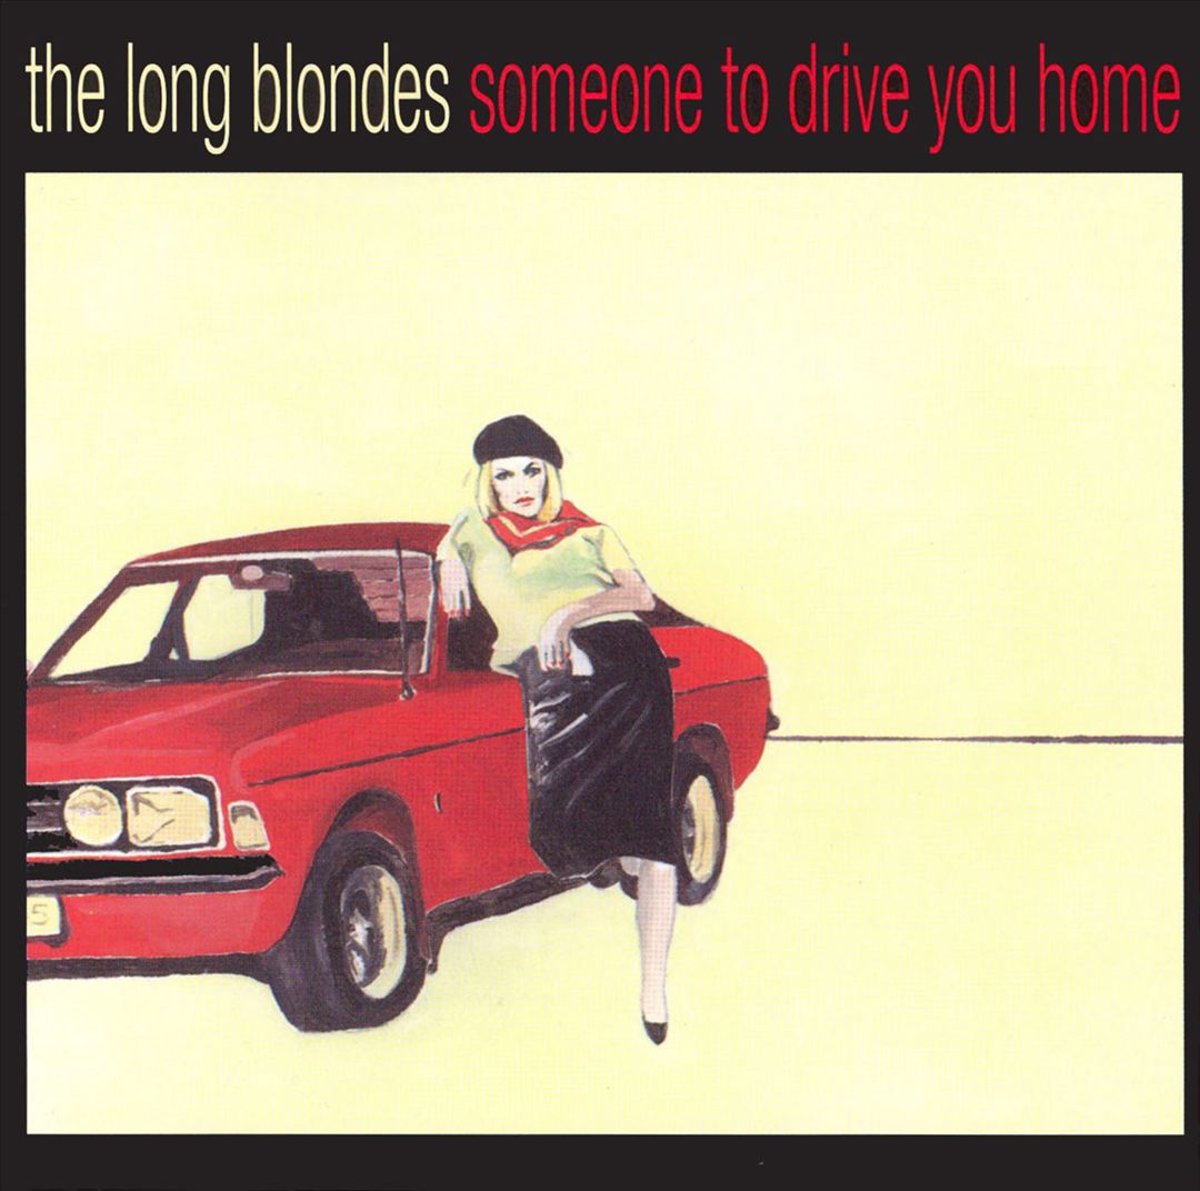 Someone to drive you home | The Long Blondes